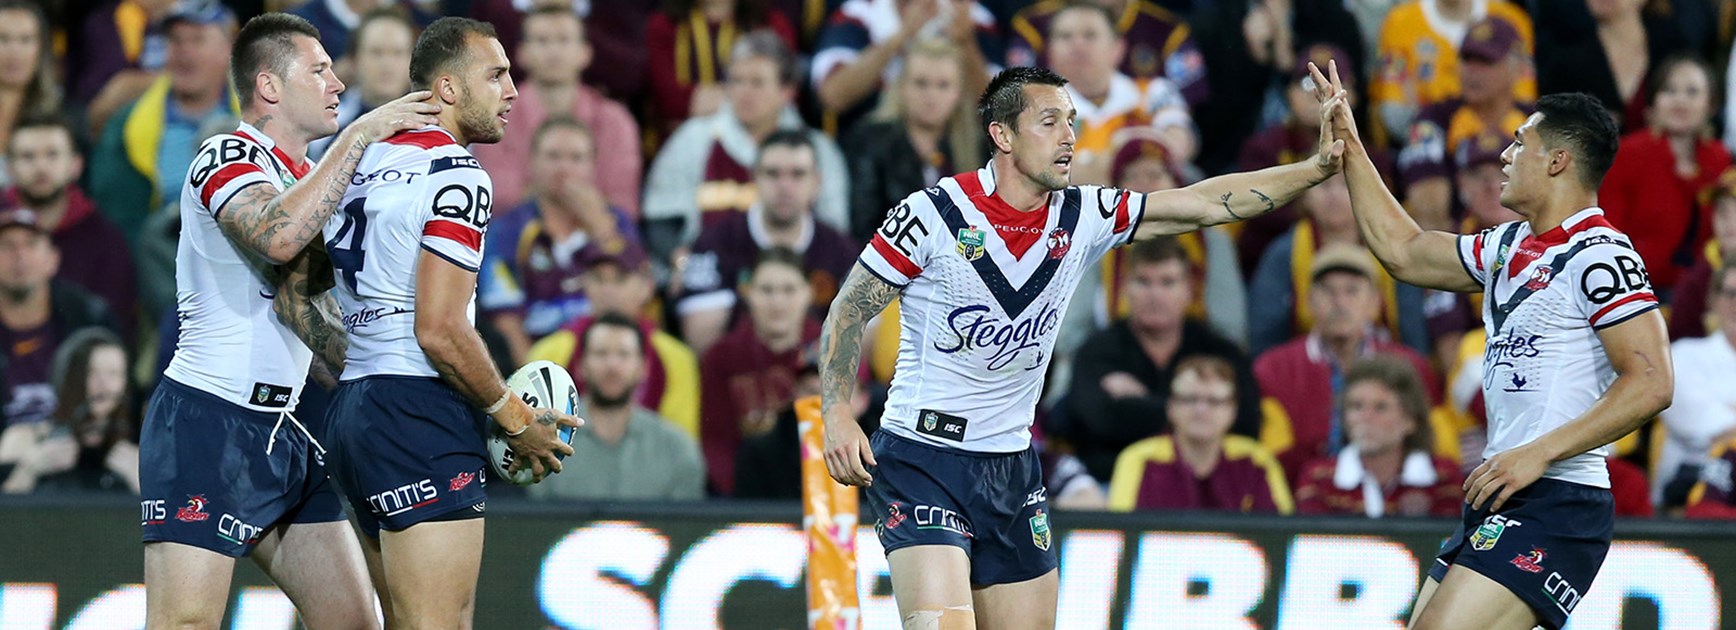 The Roosters celebrate a Blake Ferguson try in the preliminary final against the Broncos at Suncorp Stadium.